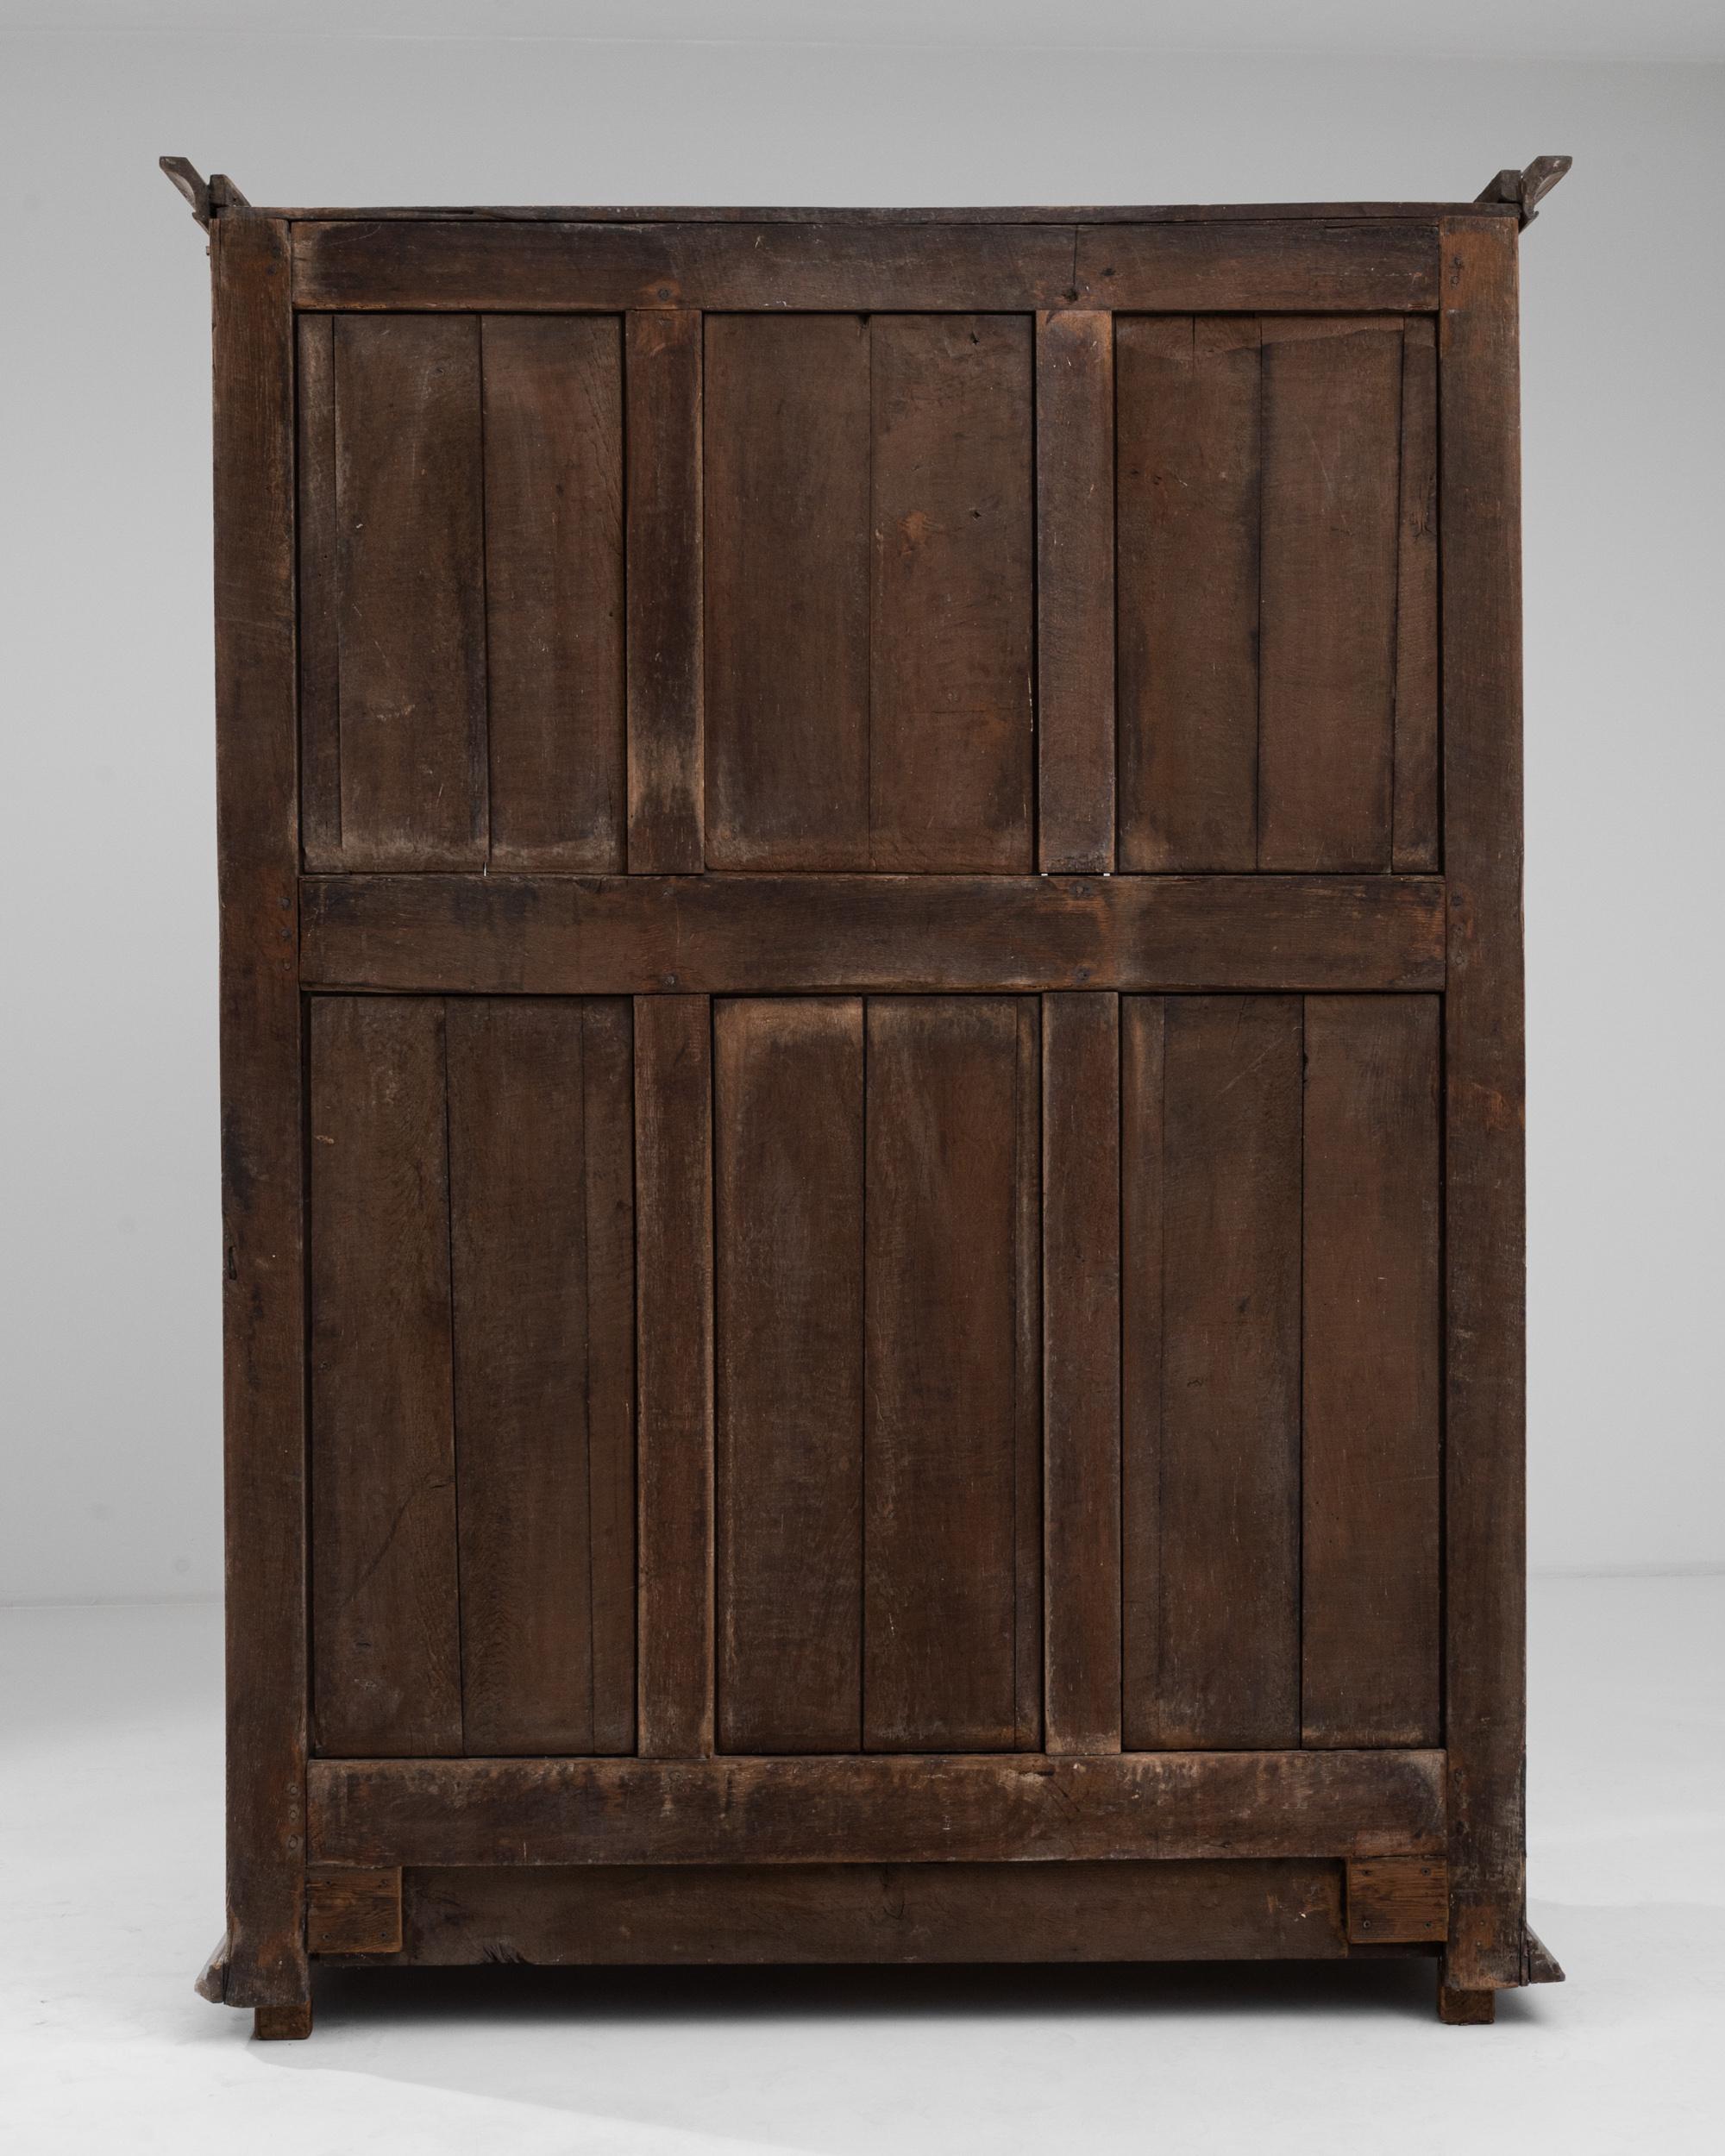 This French Bleached Oak Vitrine from the 18th Century exudes timeless elegance and offers a glimpse into the craftsmanship and sophistication of its historical era. It has two glass main doors that allow you to display your treasures on three